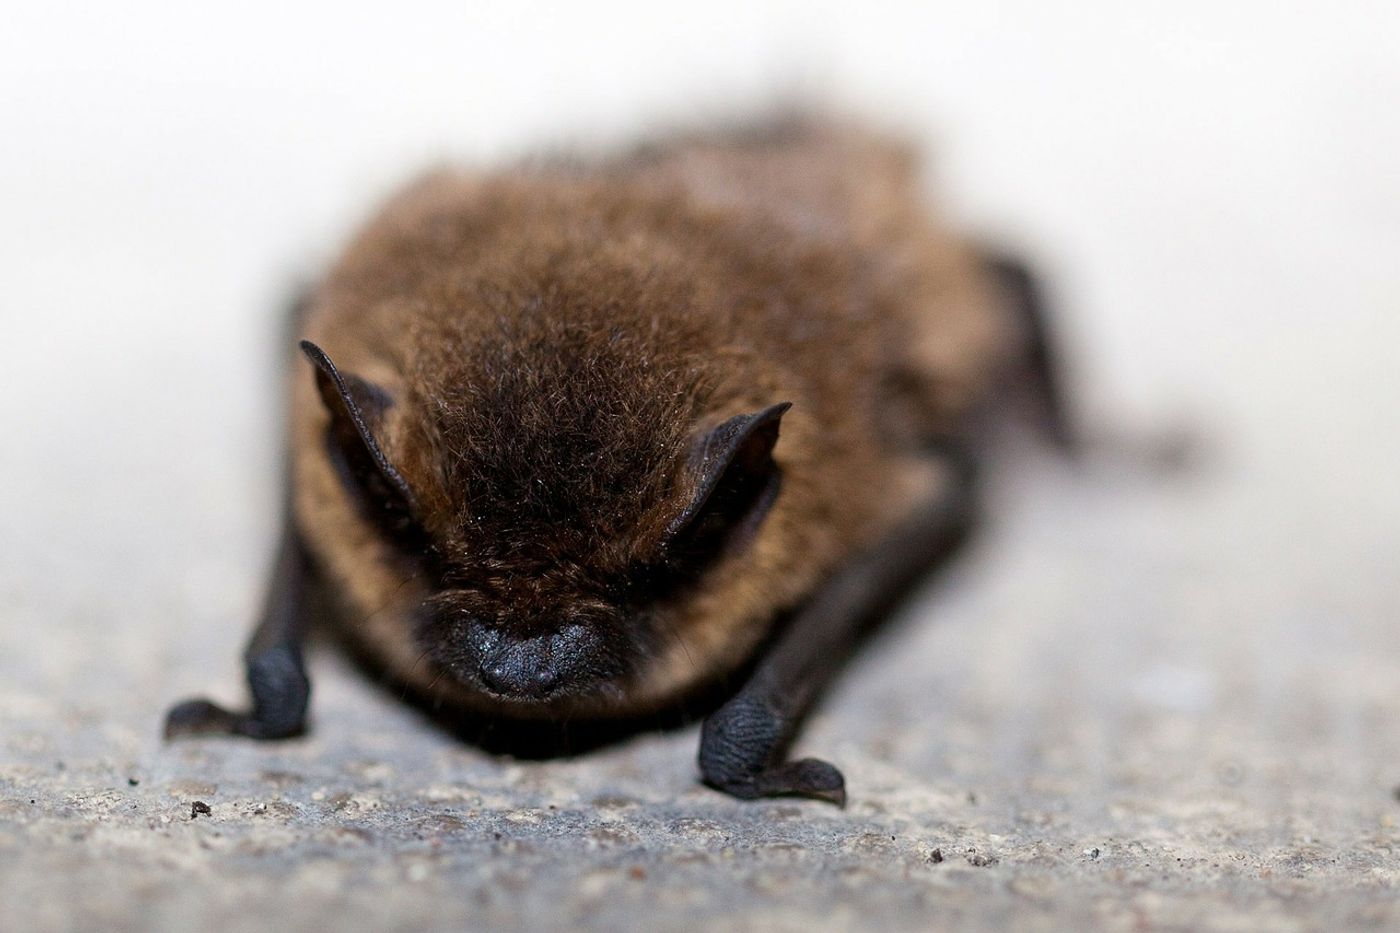 Bats may help keep mosquito populations at bay, but more research is needed.